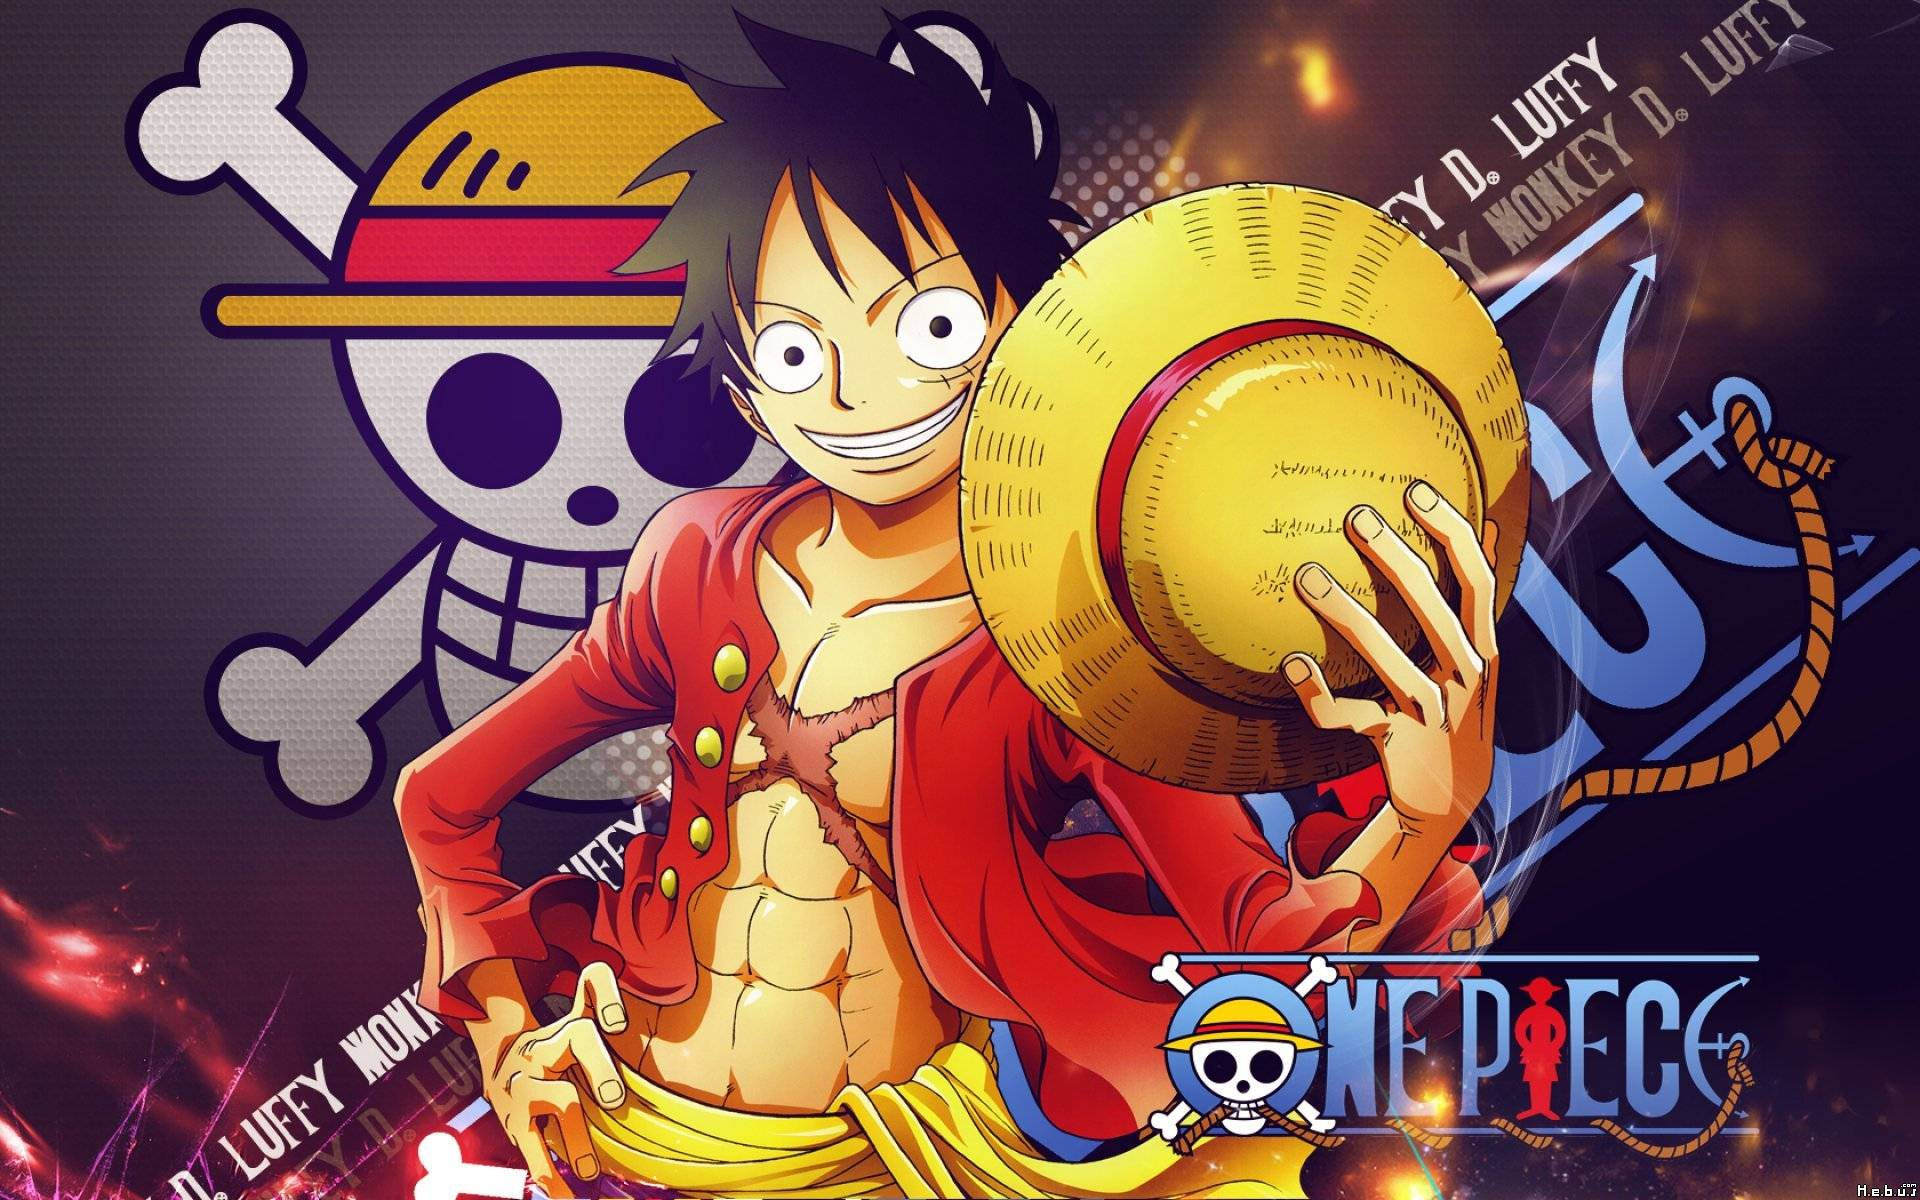 Top 999+ Luffy Wallpaper Full HD, 4K✅Free to Use